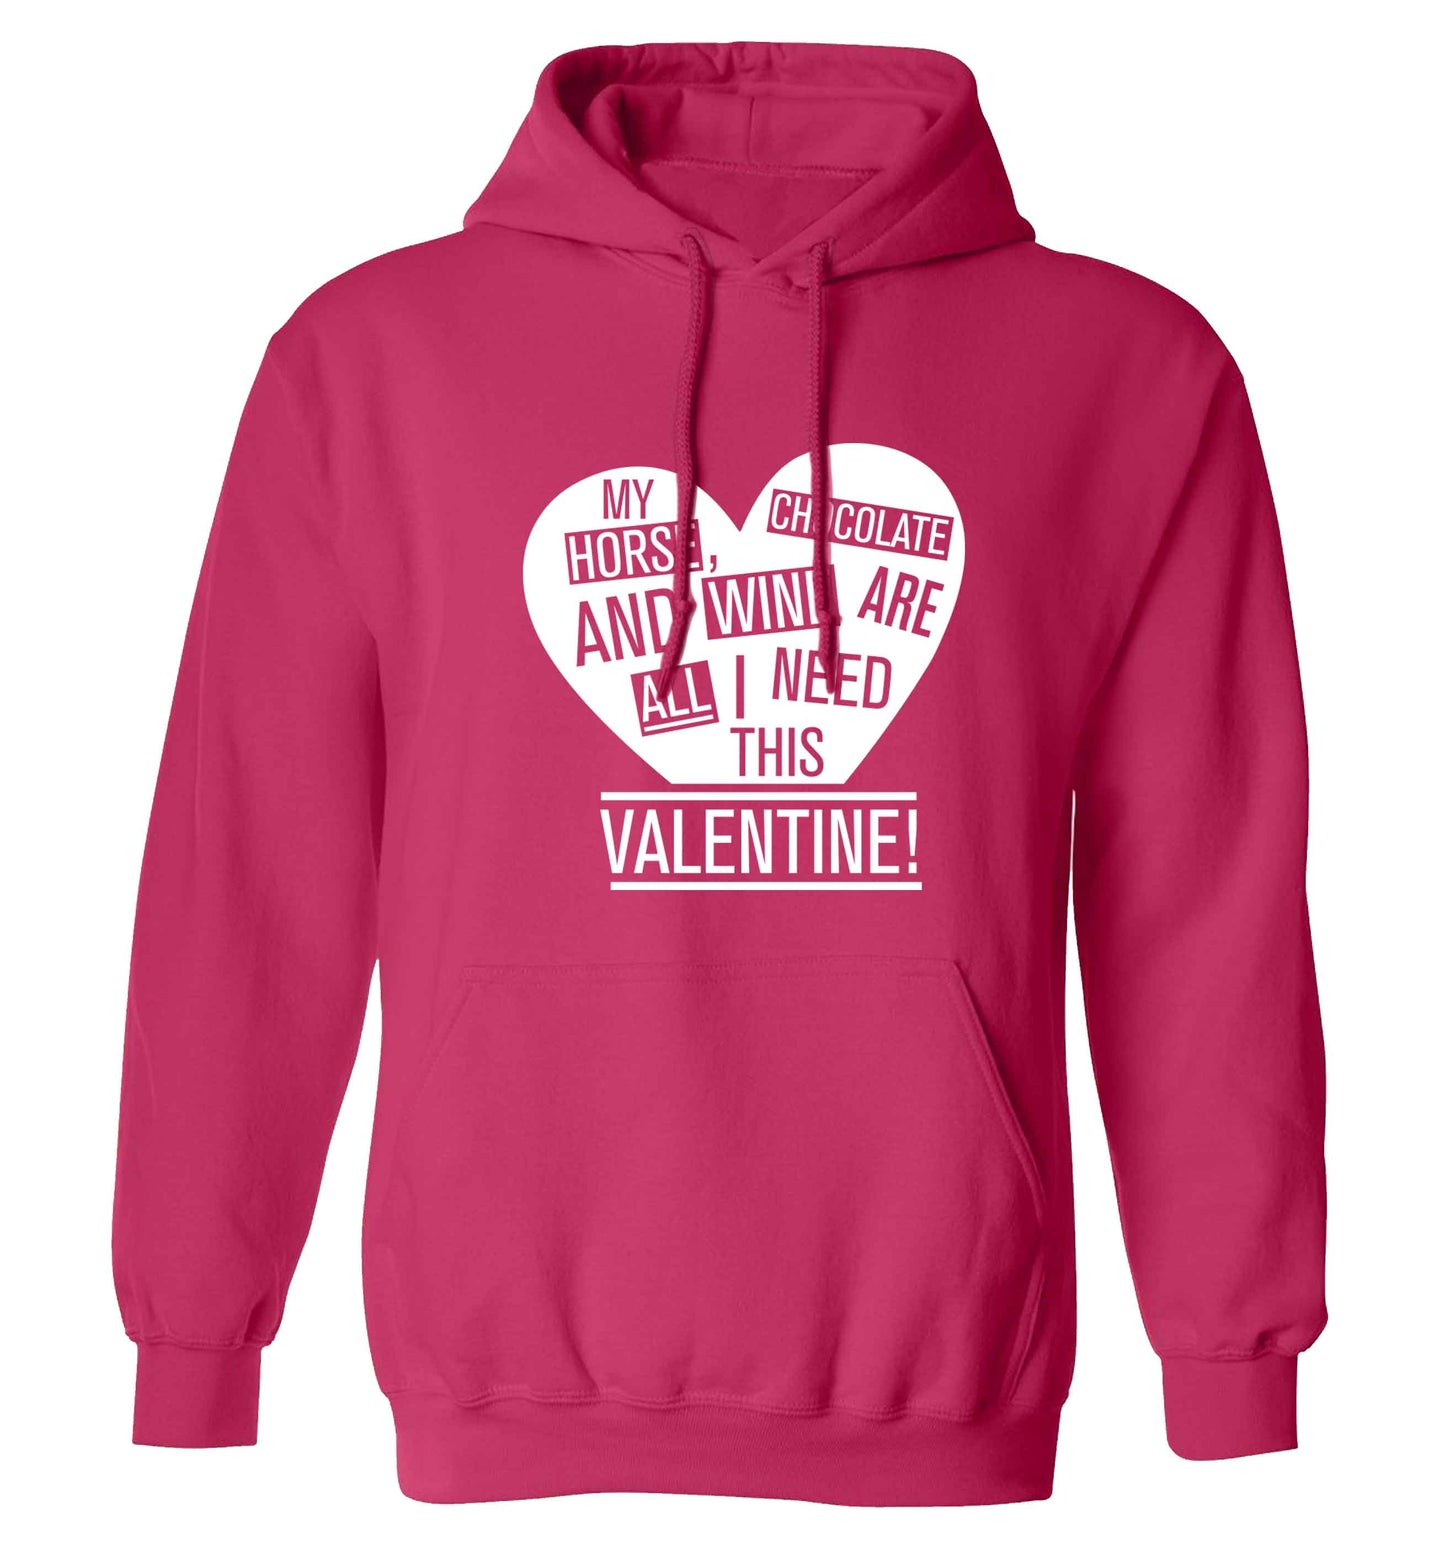 My horse chocolate and wine are all I need this valentine adults unisex pink hoodie 2XL